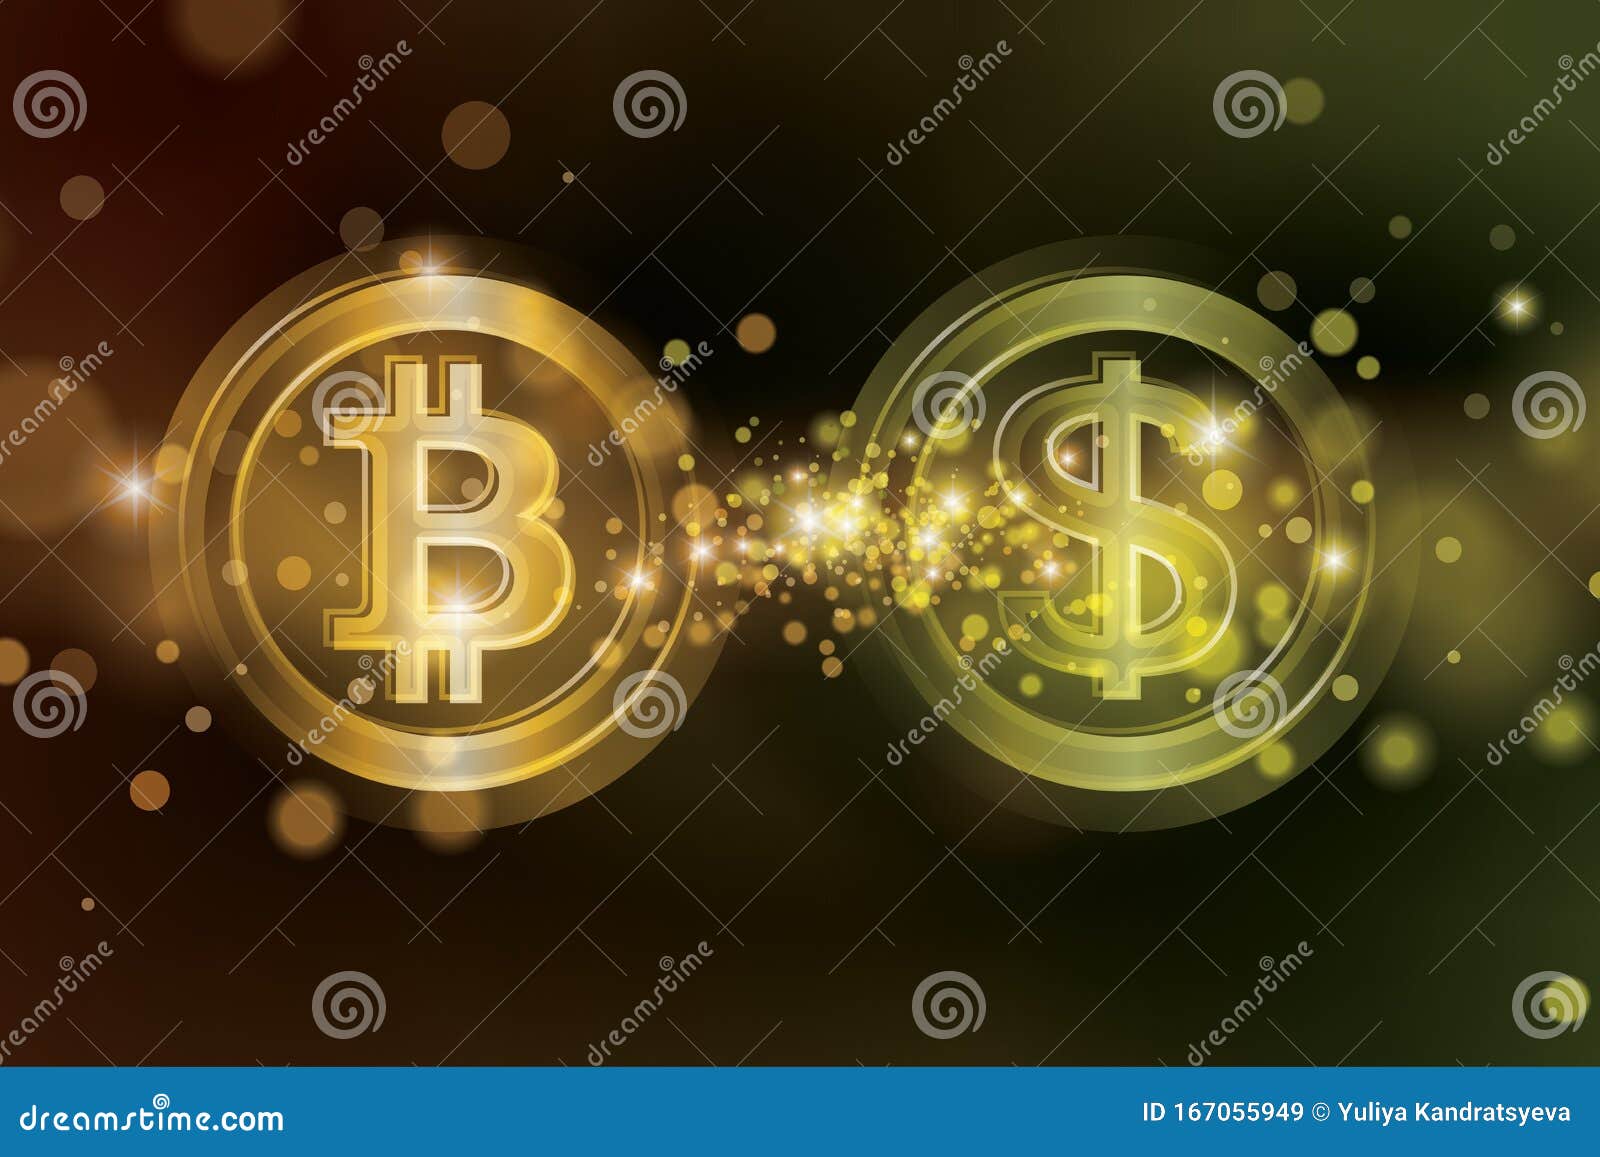 Exchange usd for bitcoin how to get rich off bitcoin